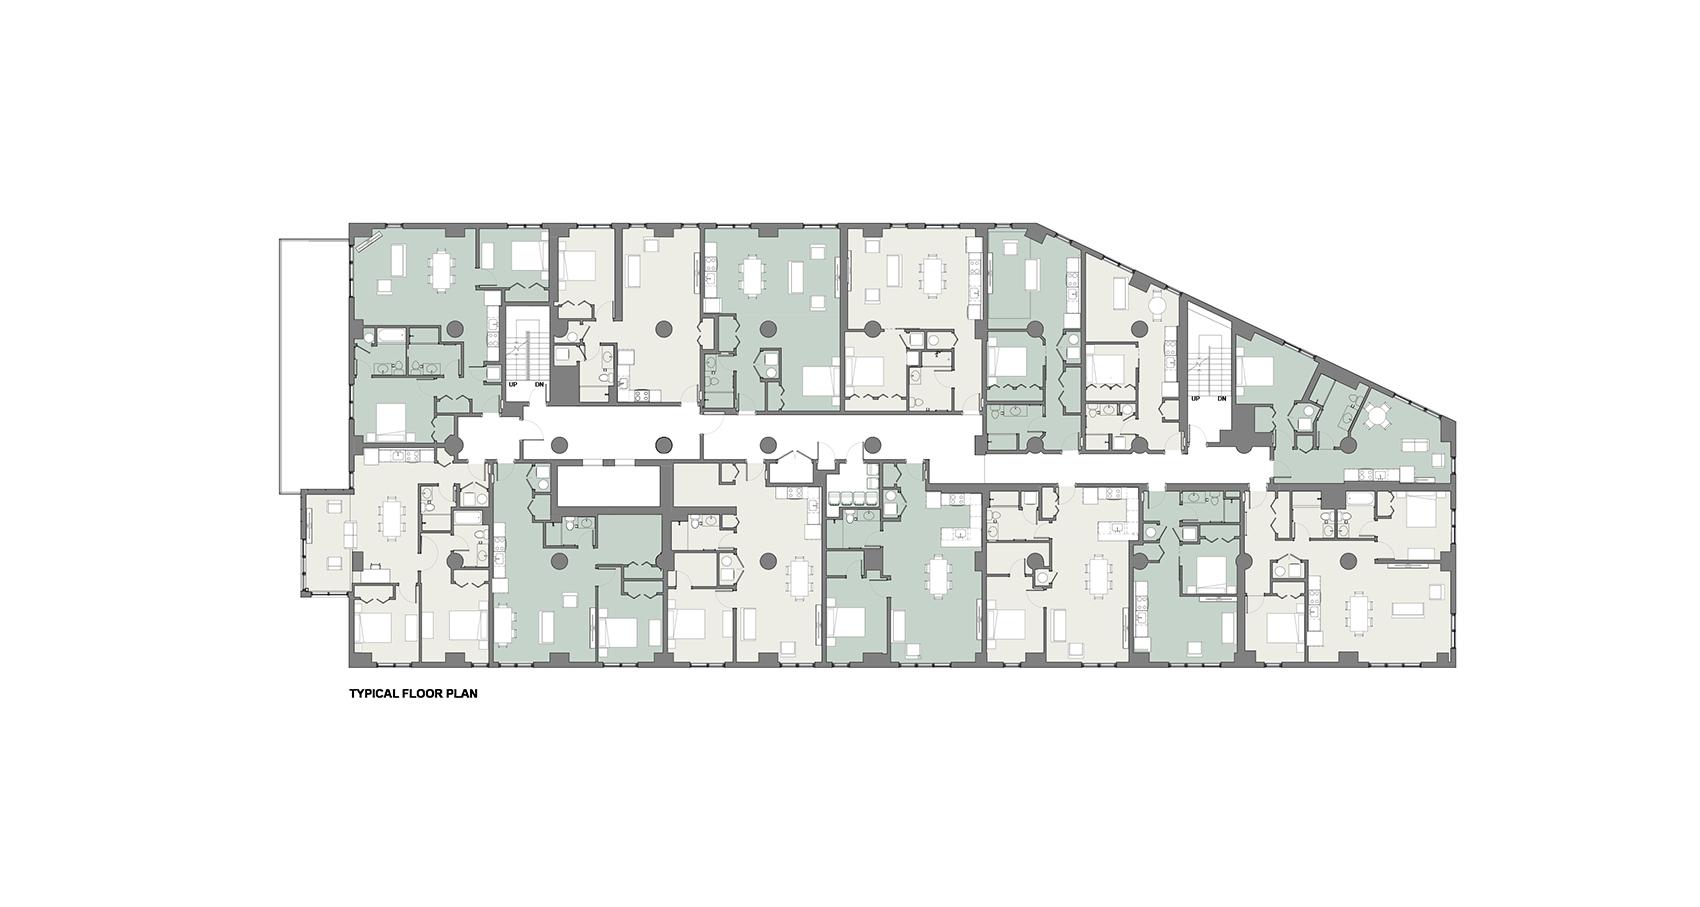 20   Millbrook Typical Floor Plan Final Cropped